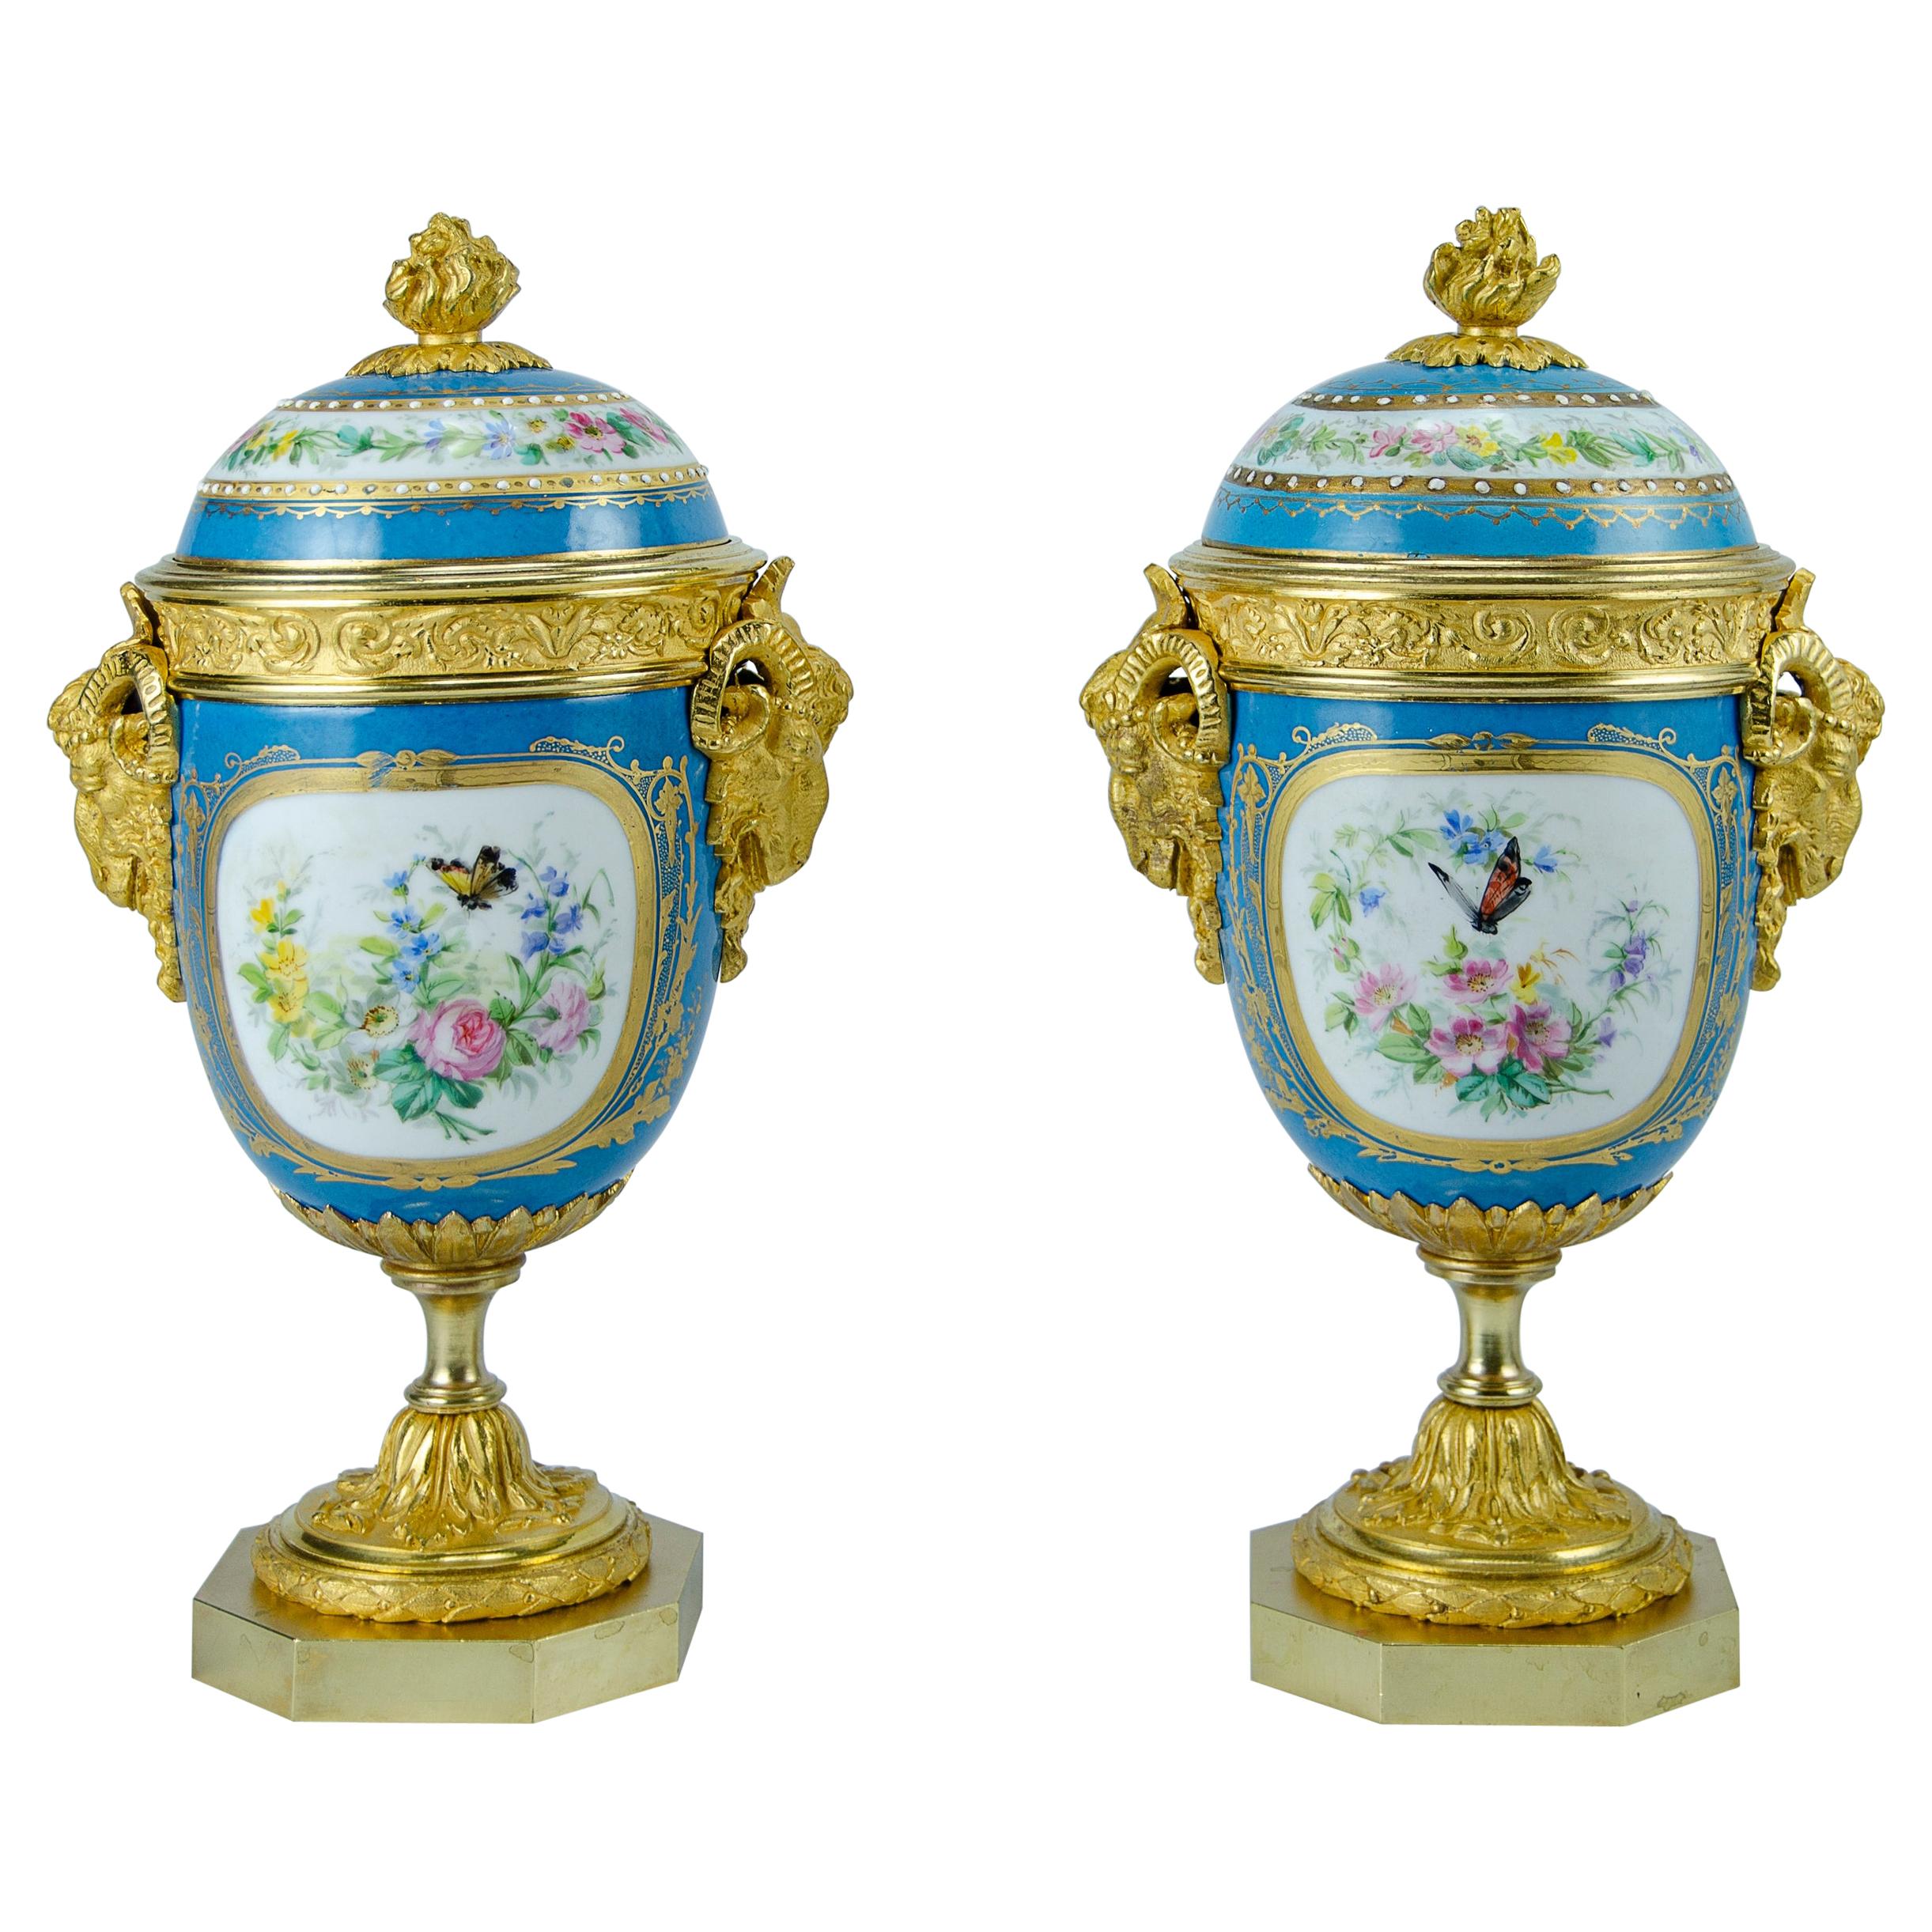 Pair of turquoise amphorae attributed to Sevres
Porcelain and gilt bronzes
Origin France circa 1900
Handles with male goats
Empire style.
The Napoleon III style had its heyday during the 1850s and 1880s. Emperor Napoleon wanted to emulate the